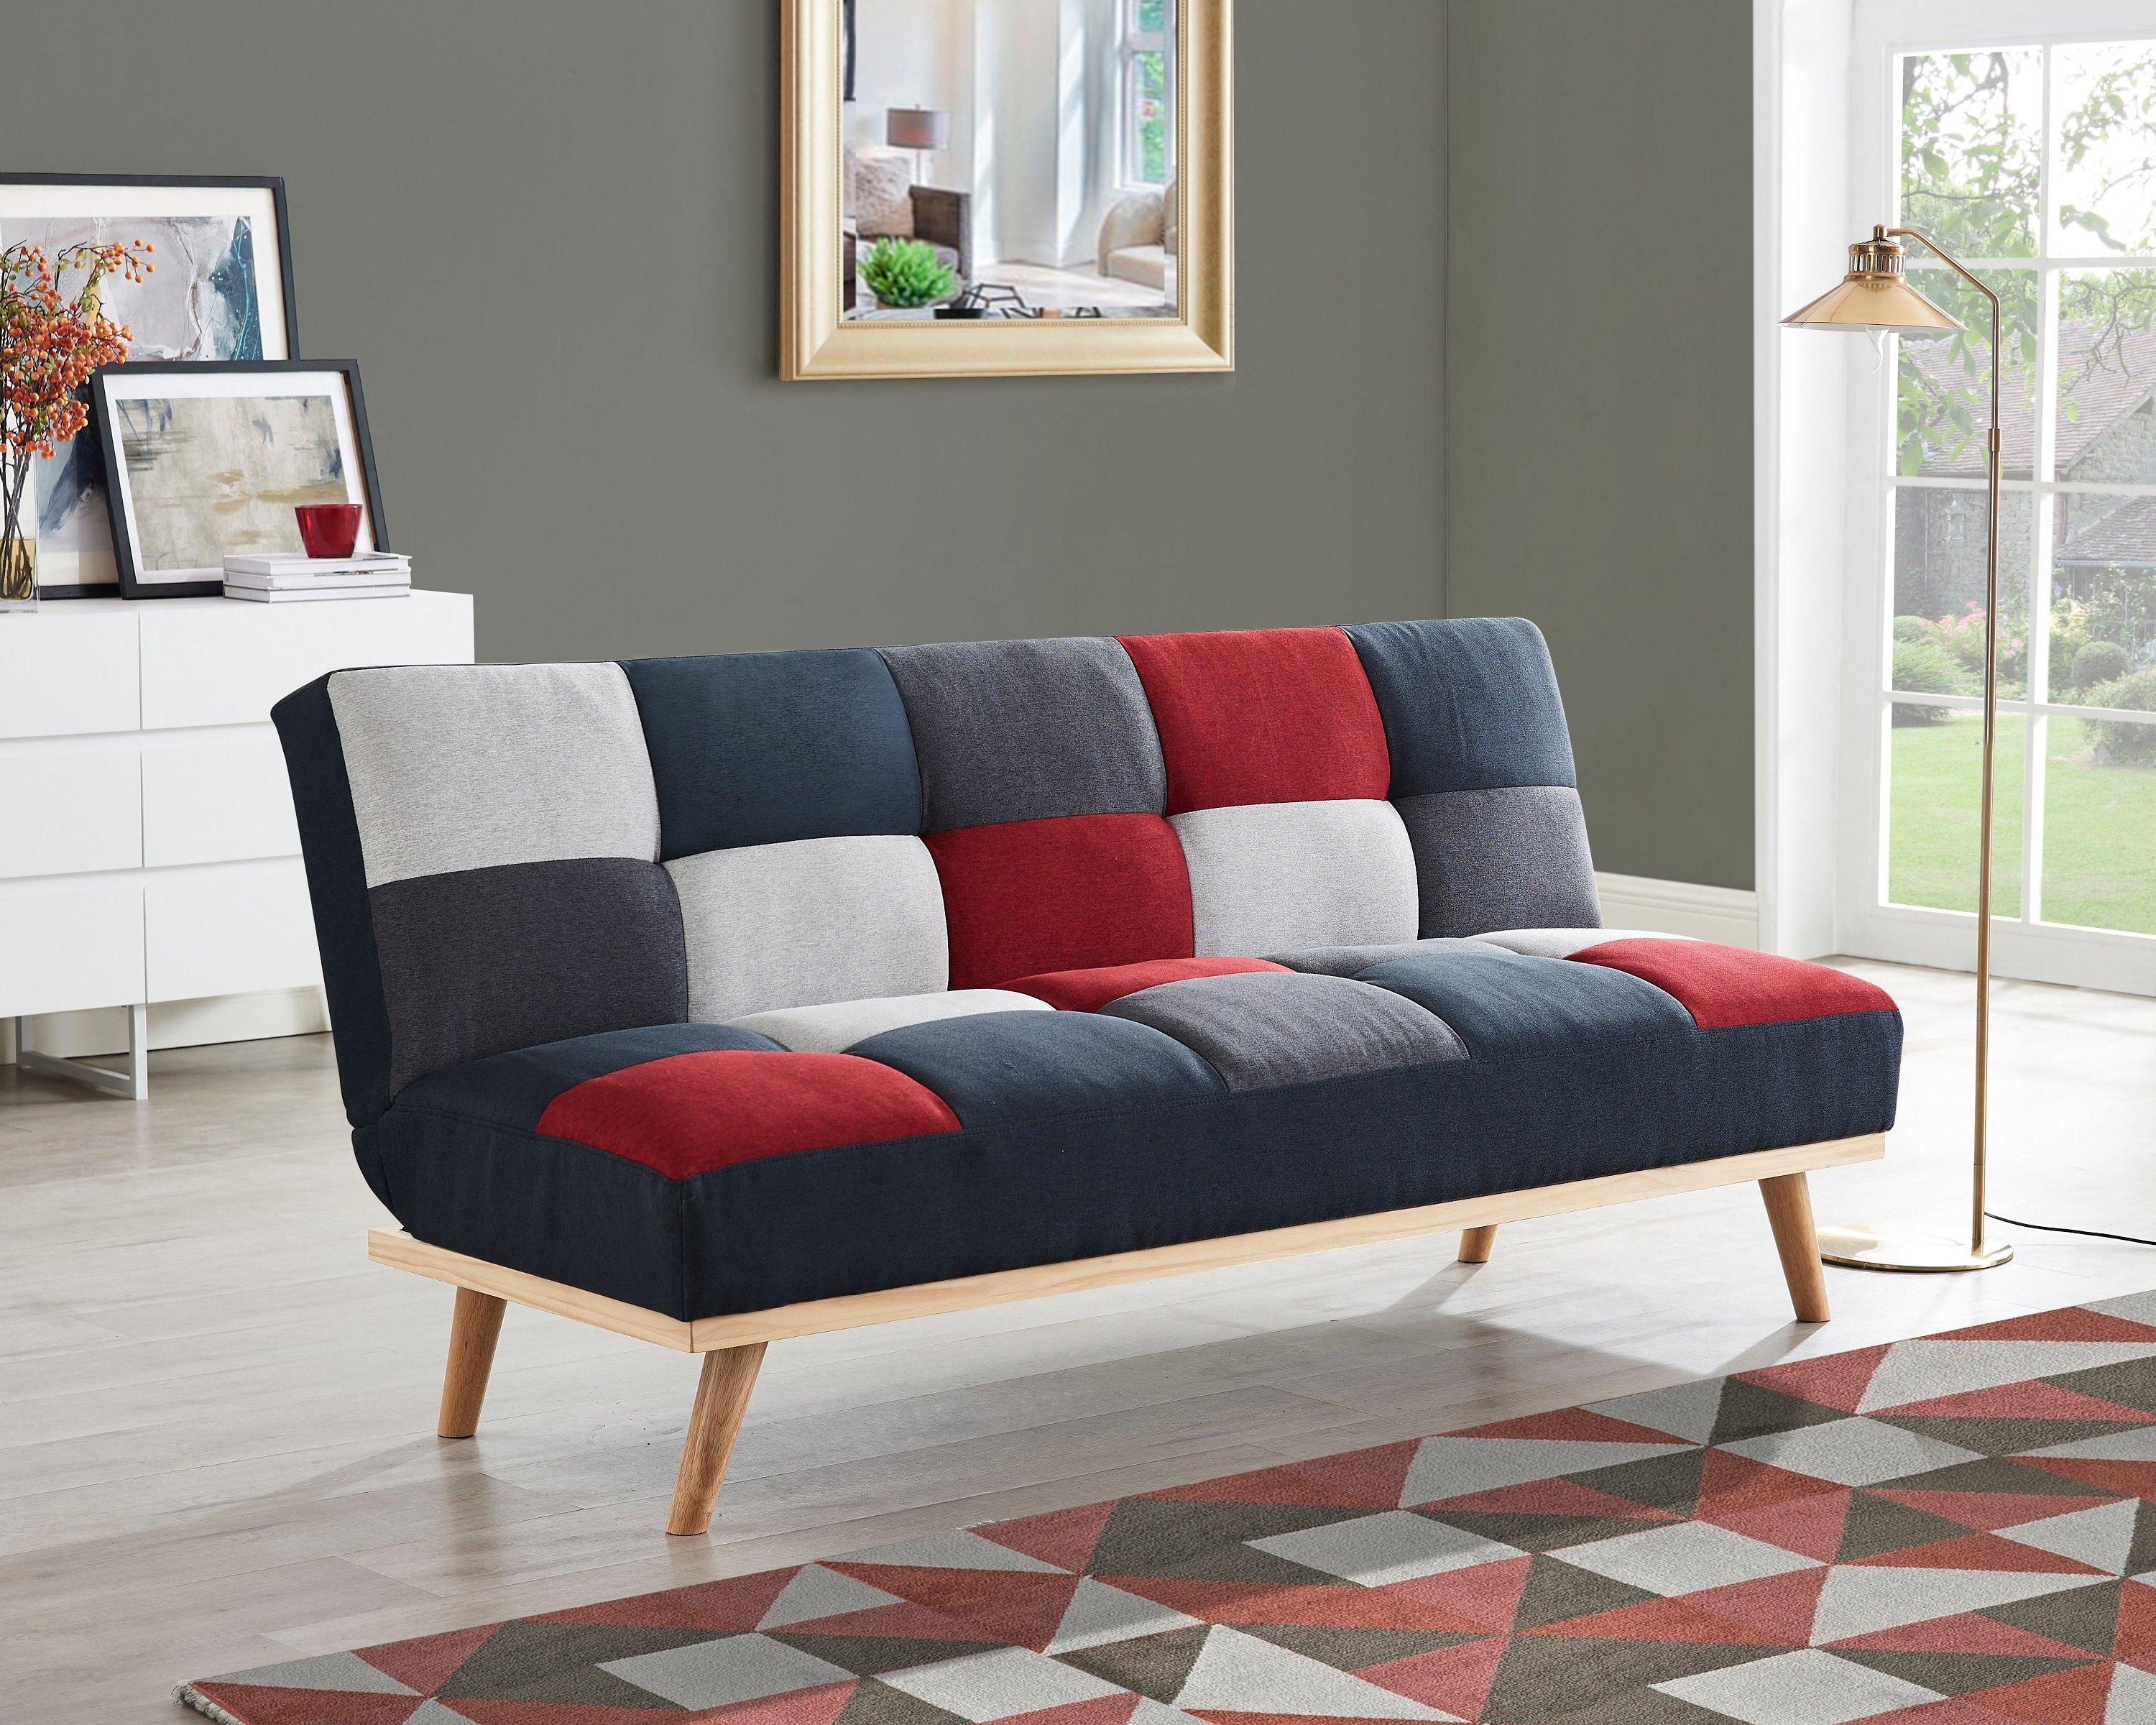 Paddock Fabric Sofa Bed Patchwork Fabric Detail With Wooden Legs